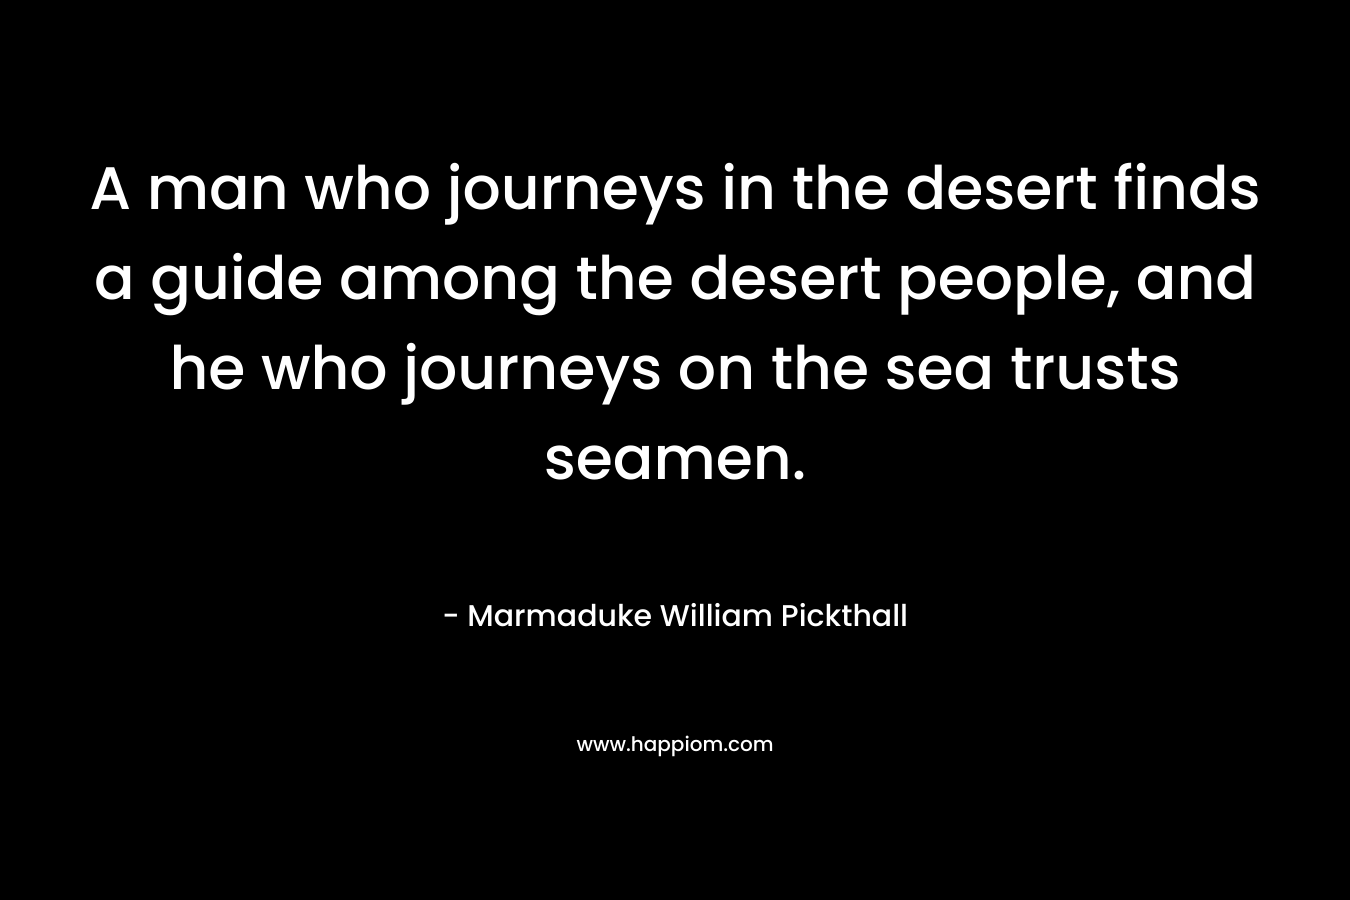 A man who journeys in the desert finds a guide among the desert people, and he who journeys on the sea trusts seamen. – Marmaduke William Pickthall